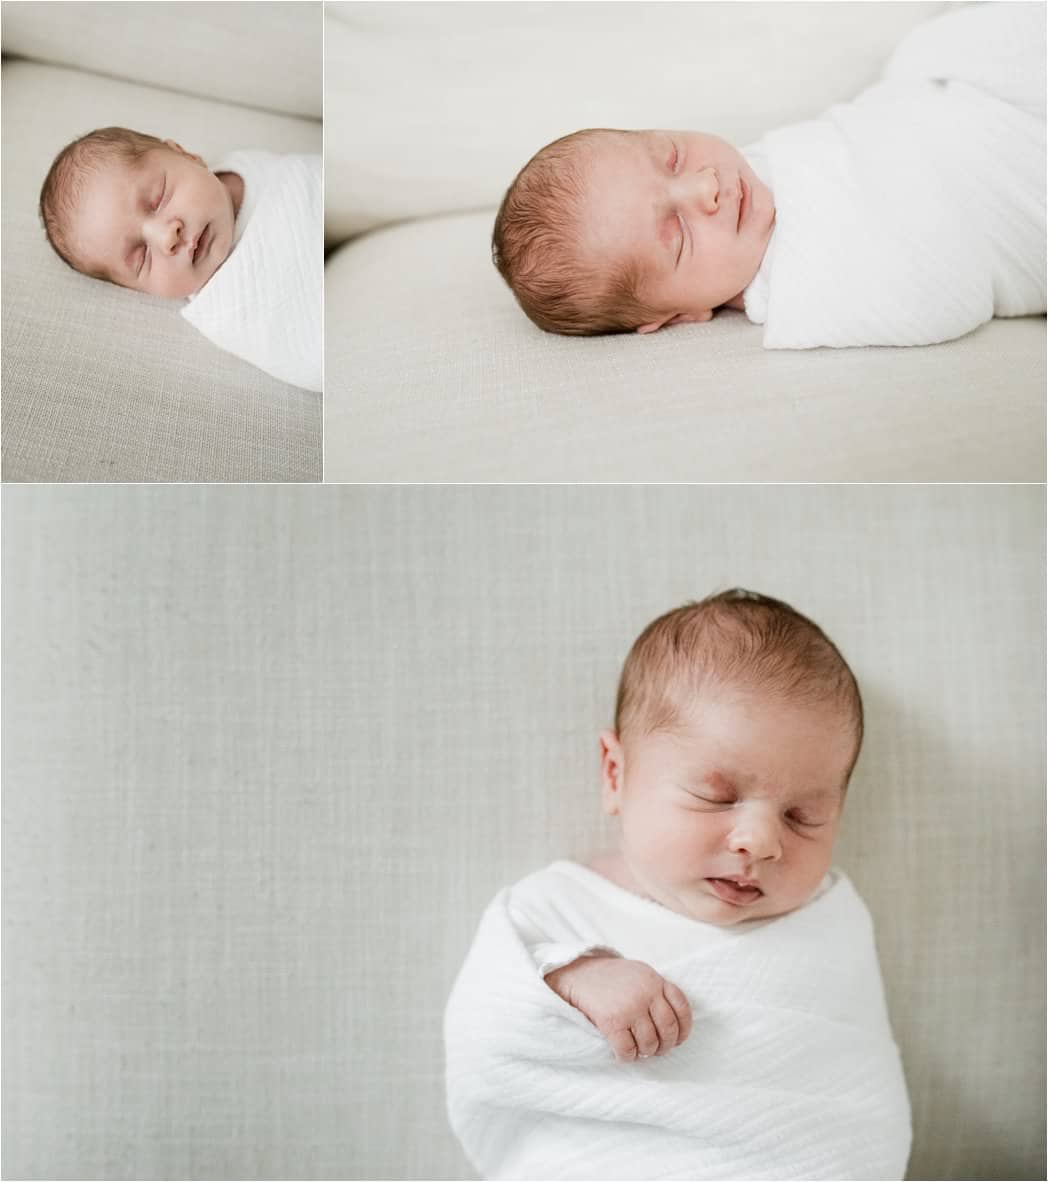 simple and natural newborn photos taken at home